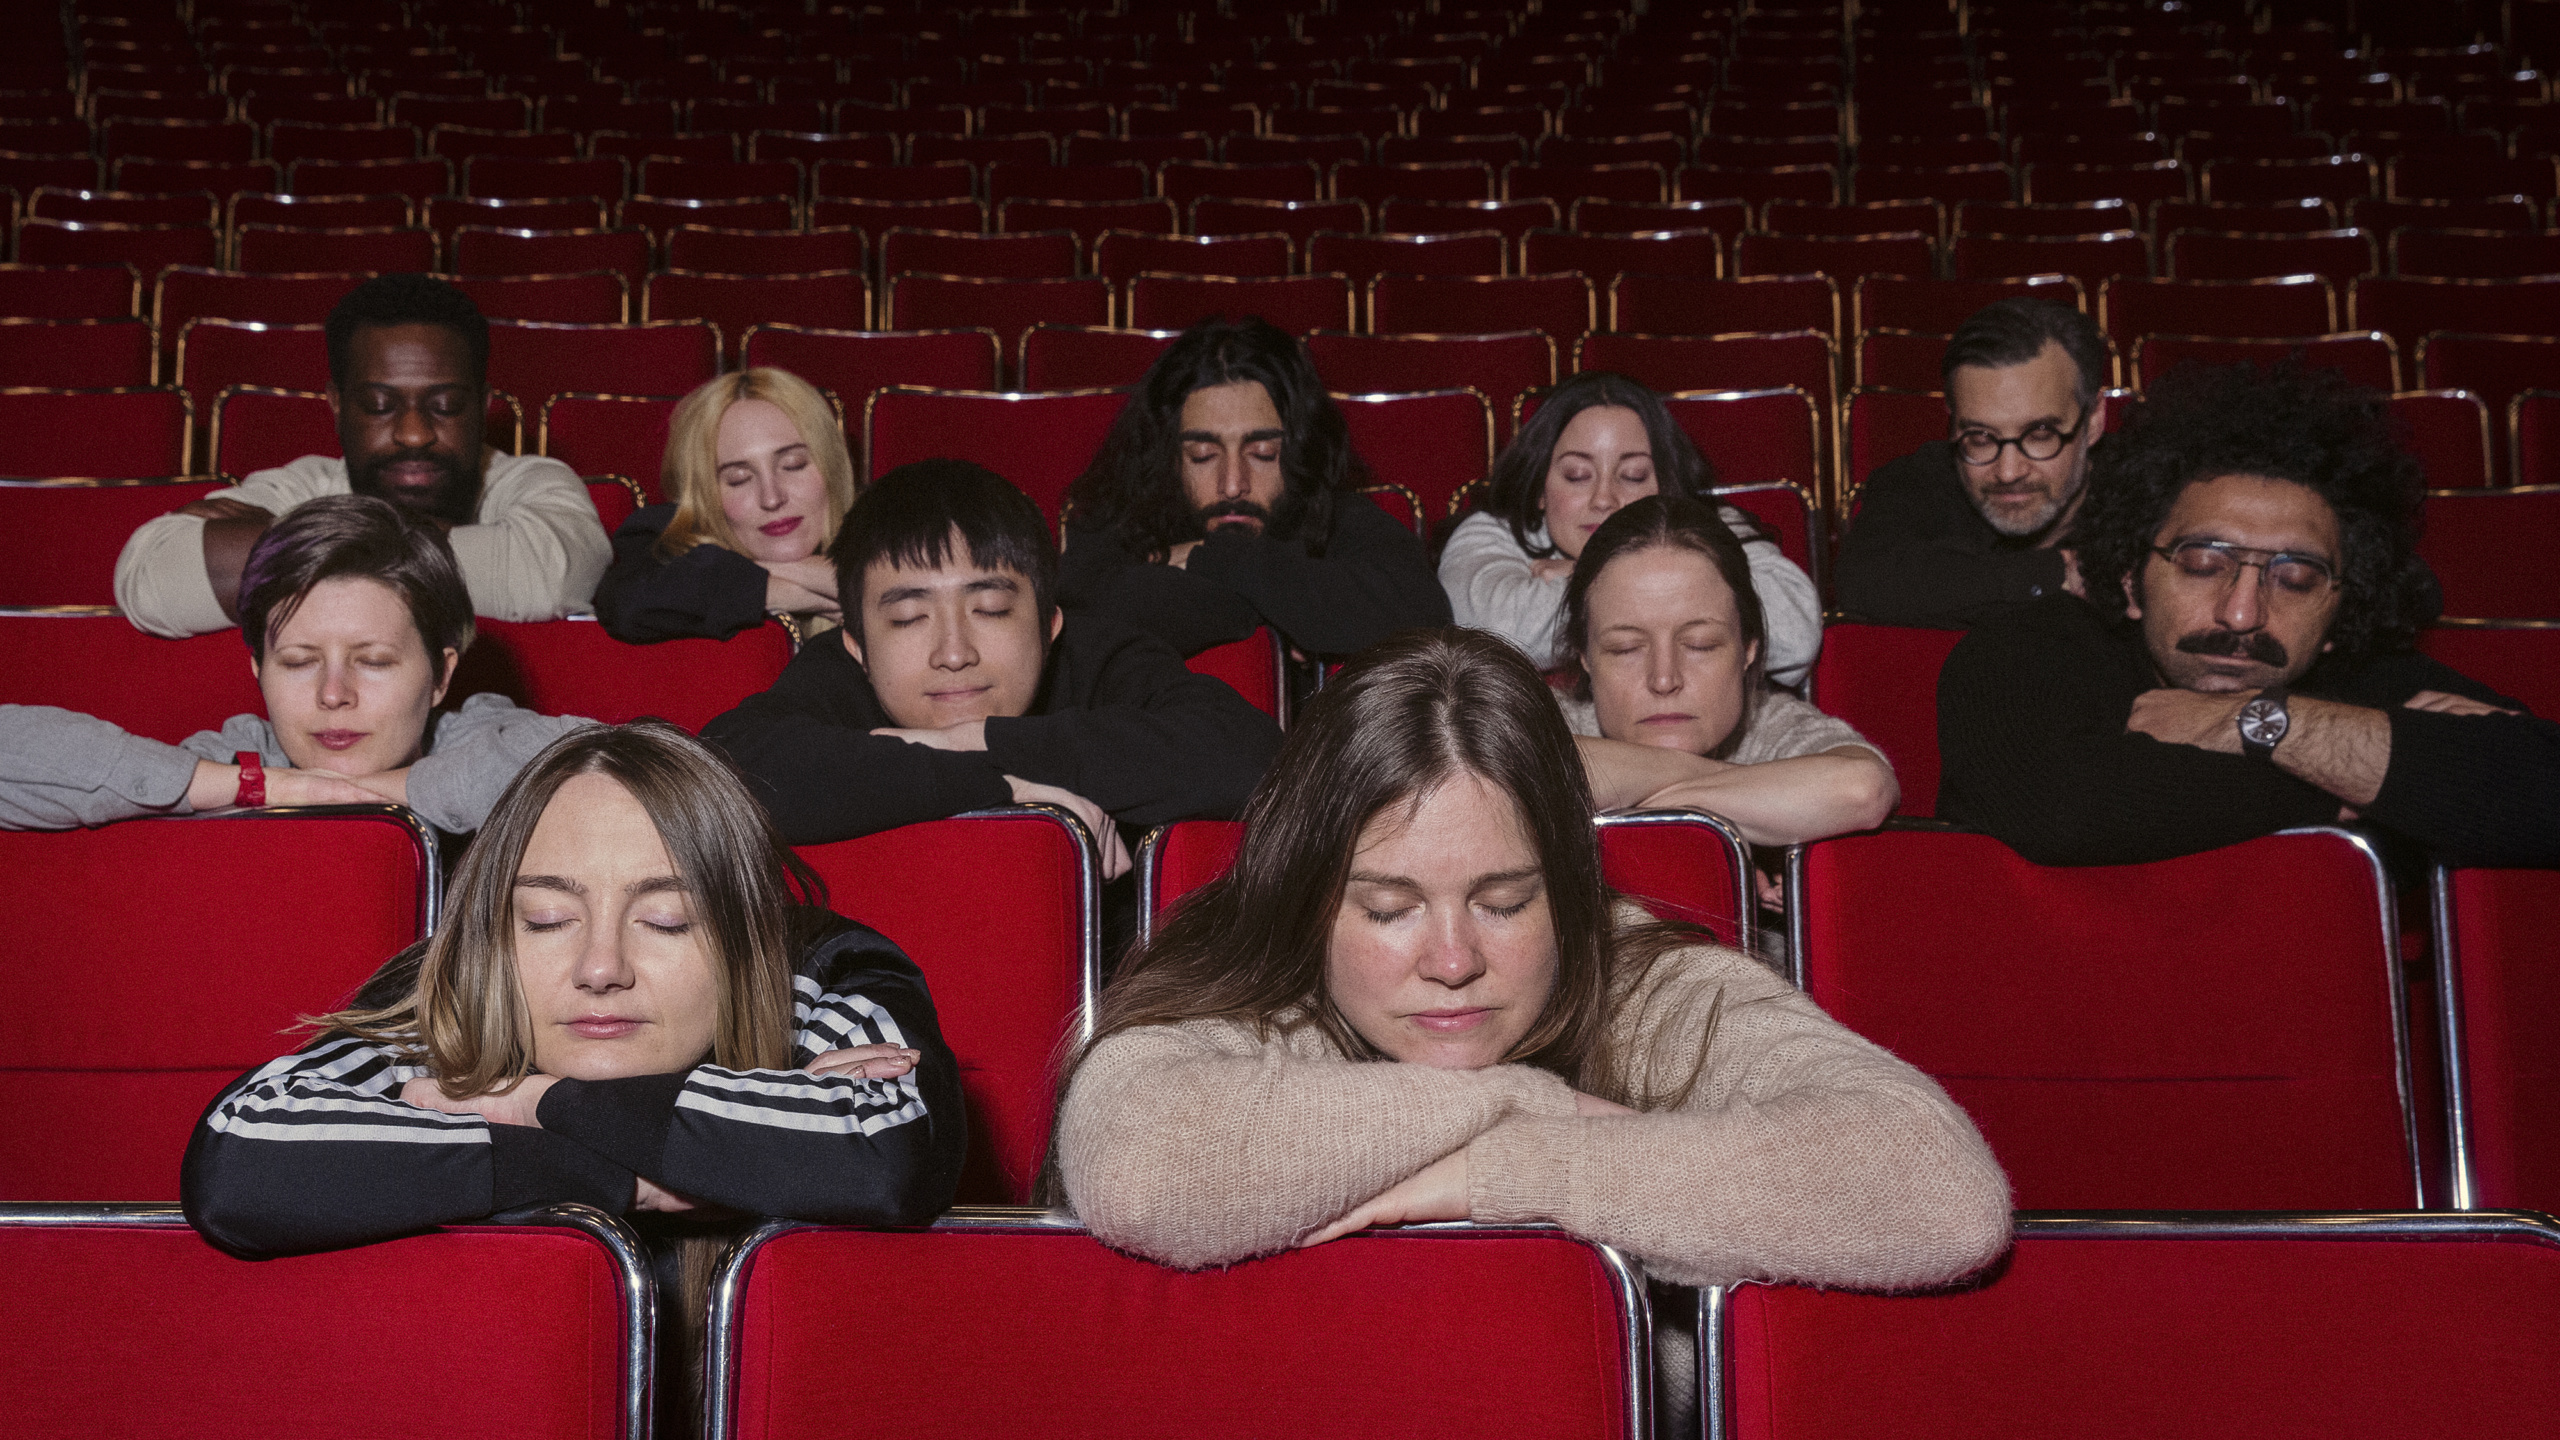 Students and teachers are sitting and leaning on the seats in front of them with their eyes closed in a cinema.